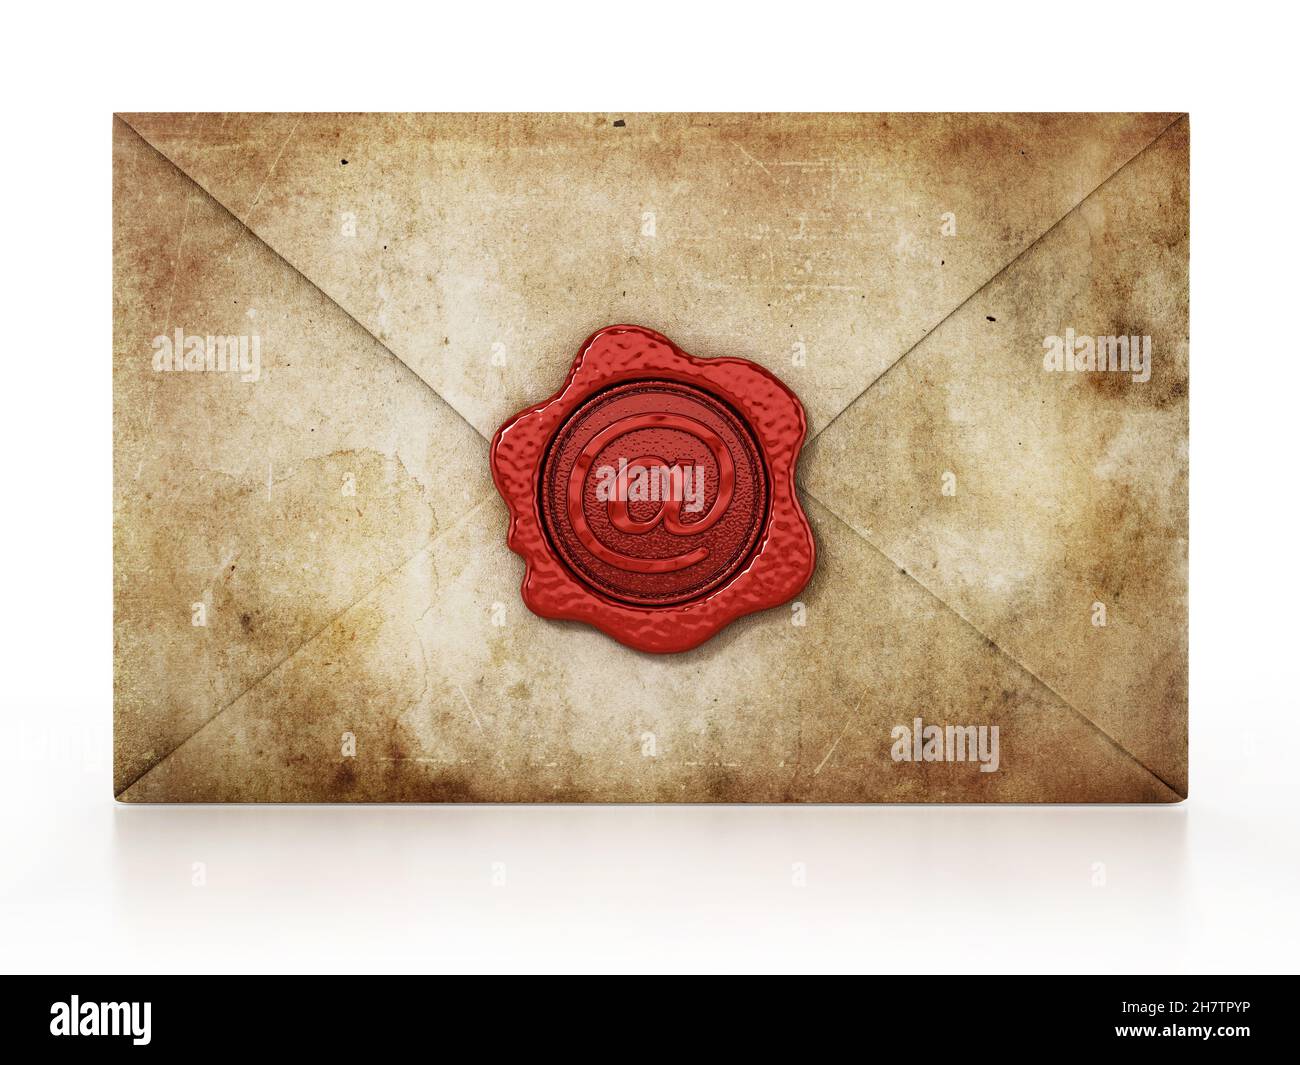 10,044 Wax Seal Envelope Images, Stock Photos, 3D objects